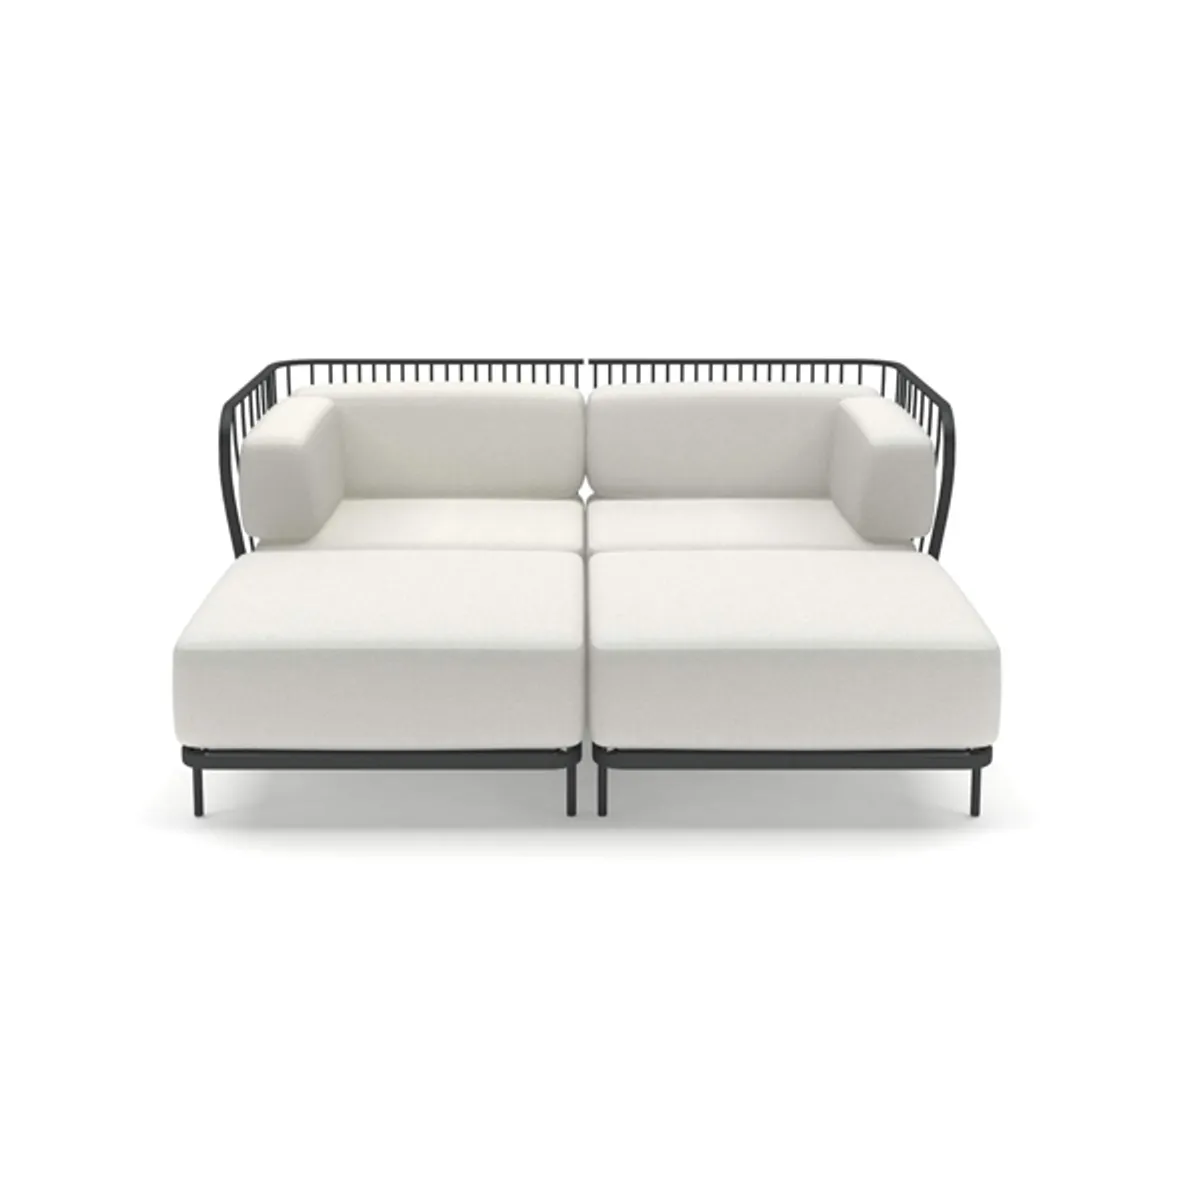 Cannole modular sofa Inside Out Contracts11